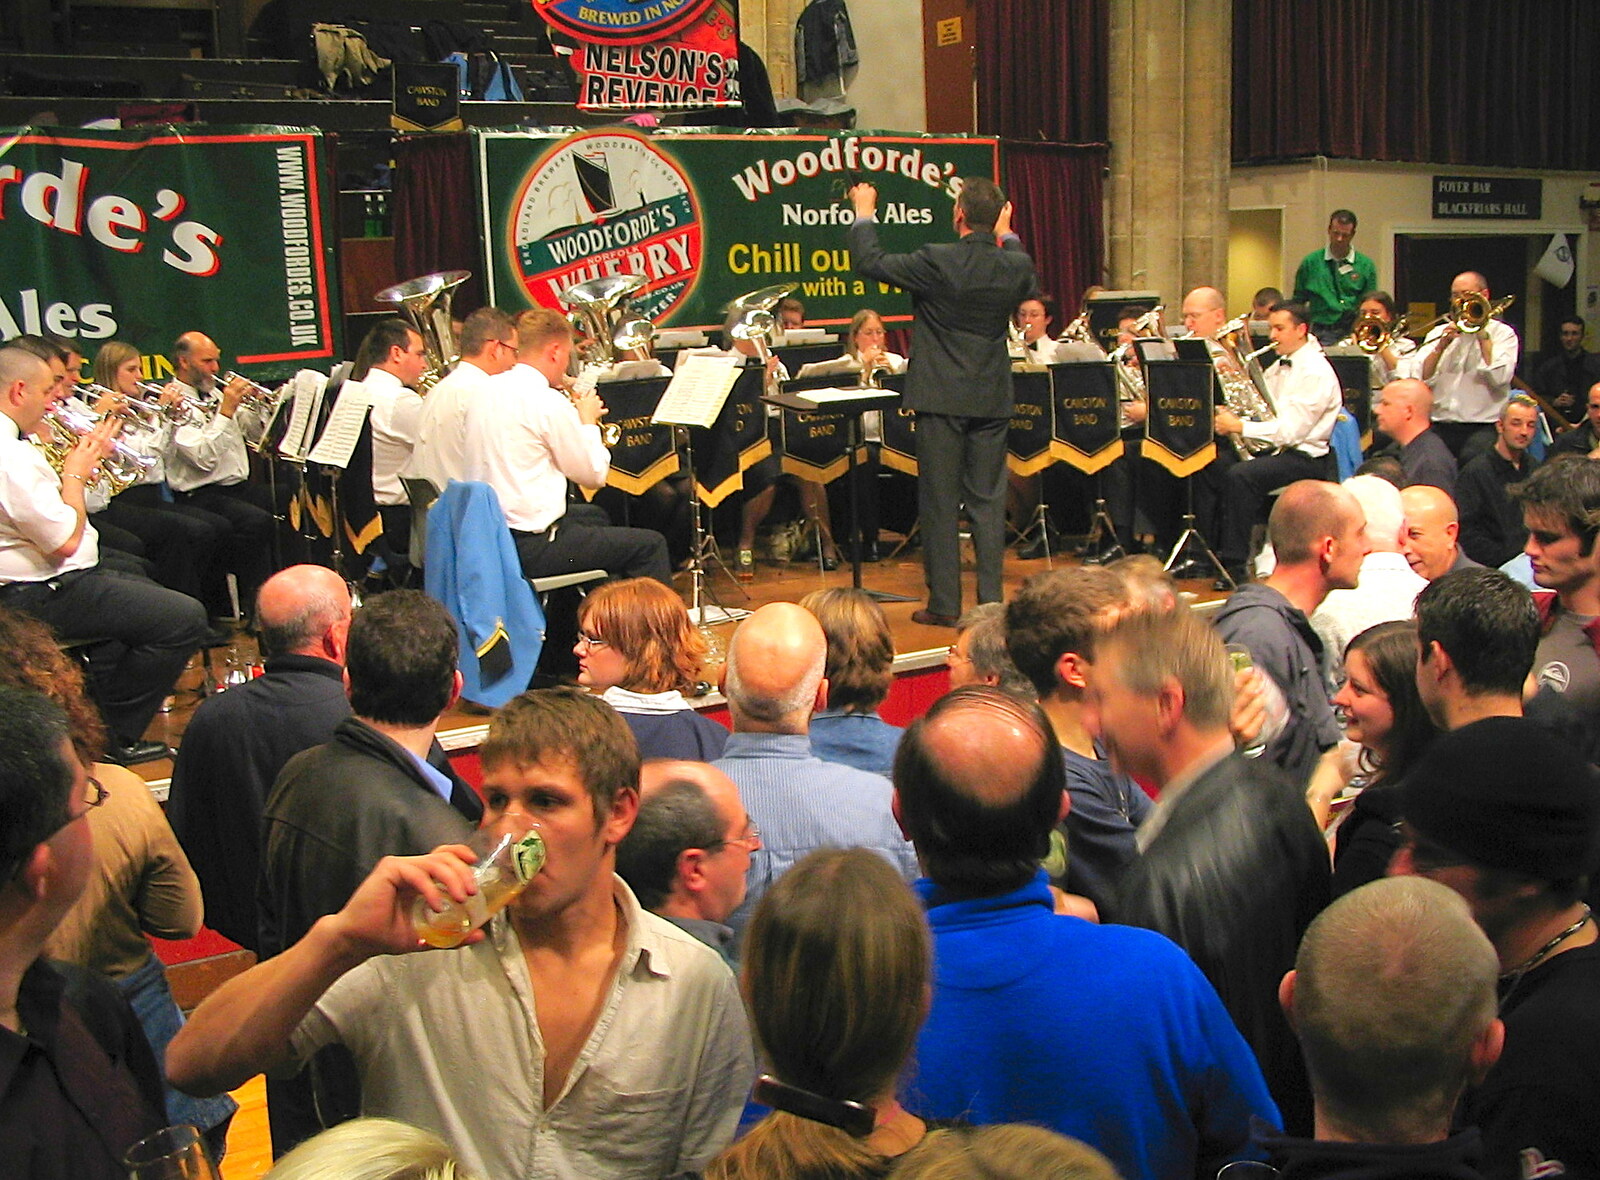 A view of the Cawston Silver Band from The Norfolk and Norwich Beer Festival, St. Andrew's Hall, Norwich - 27th October 2004